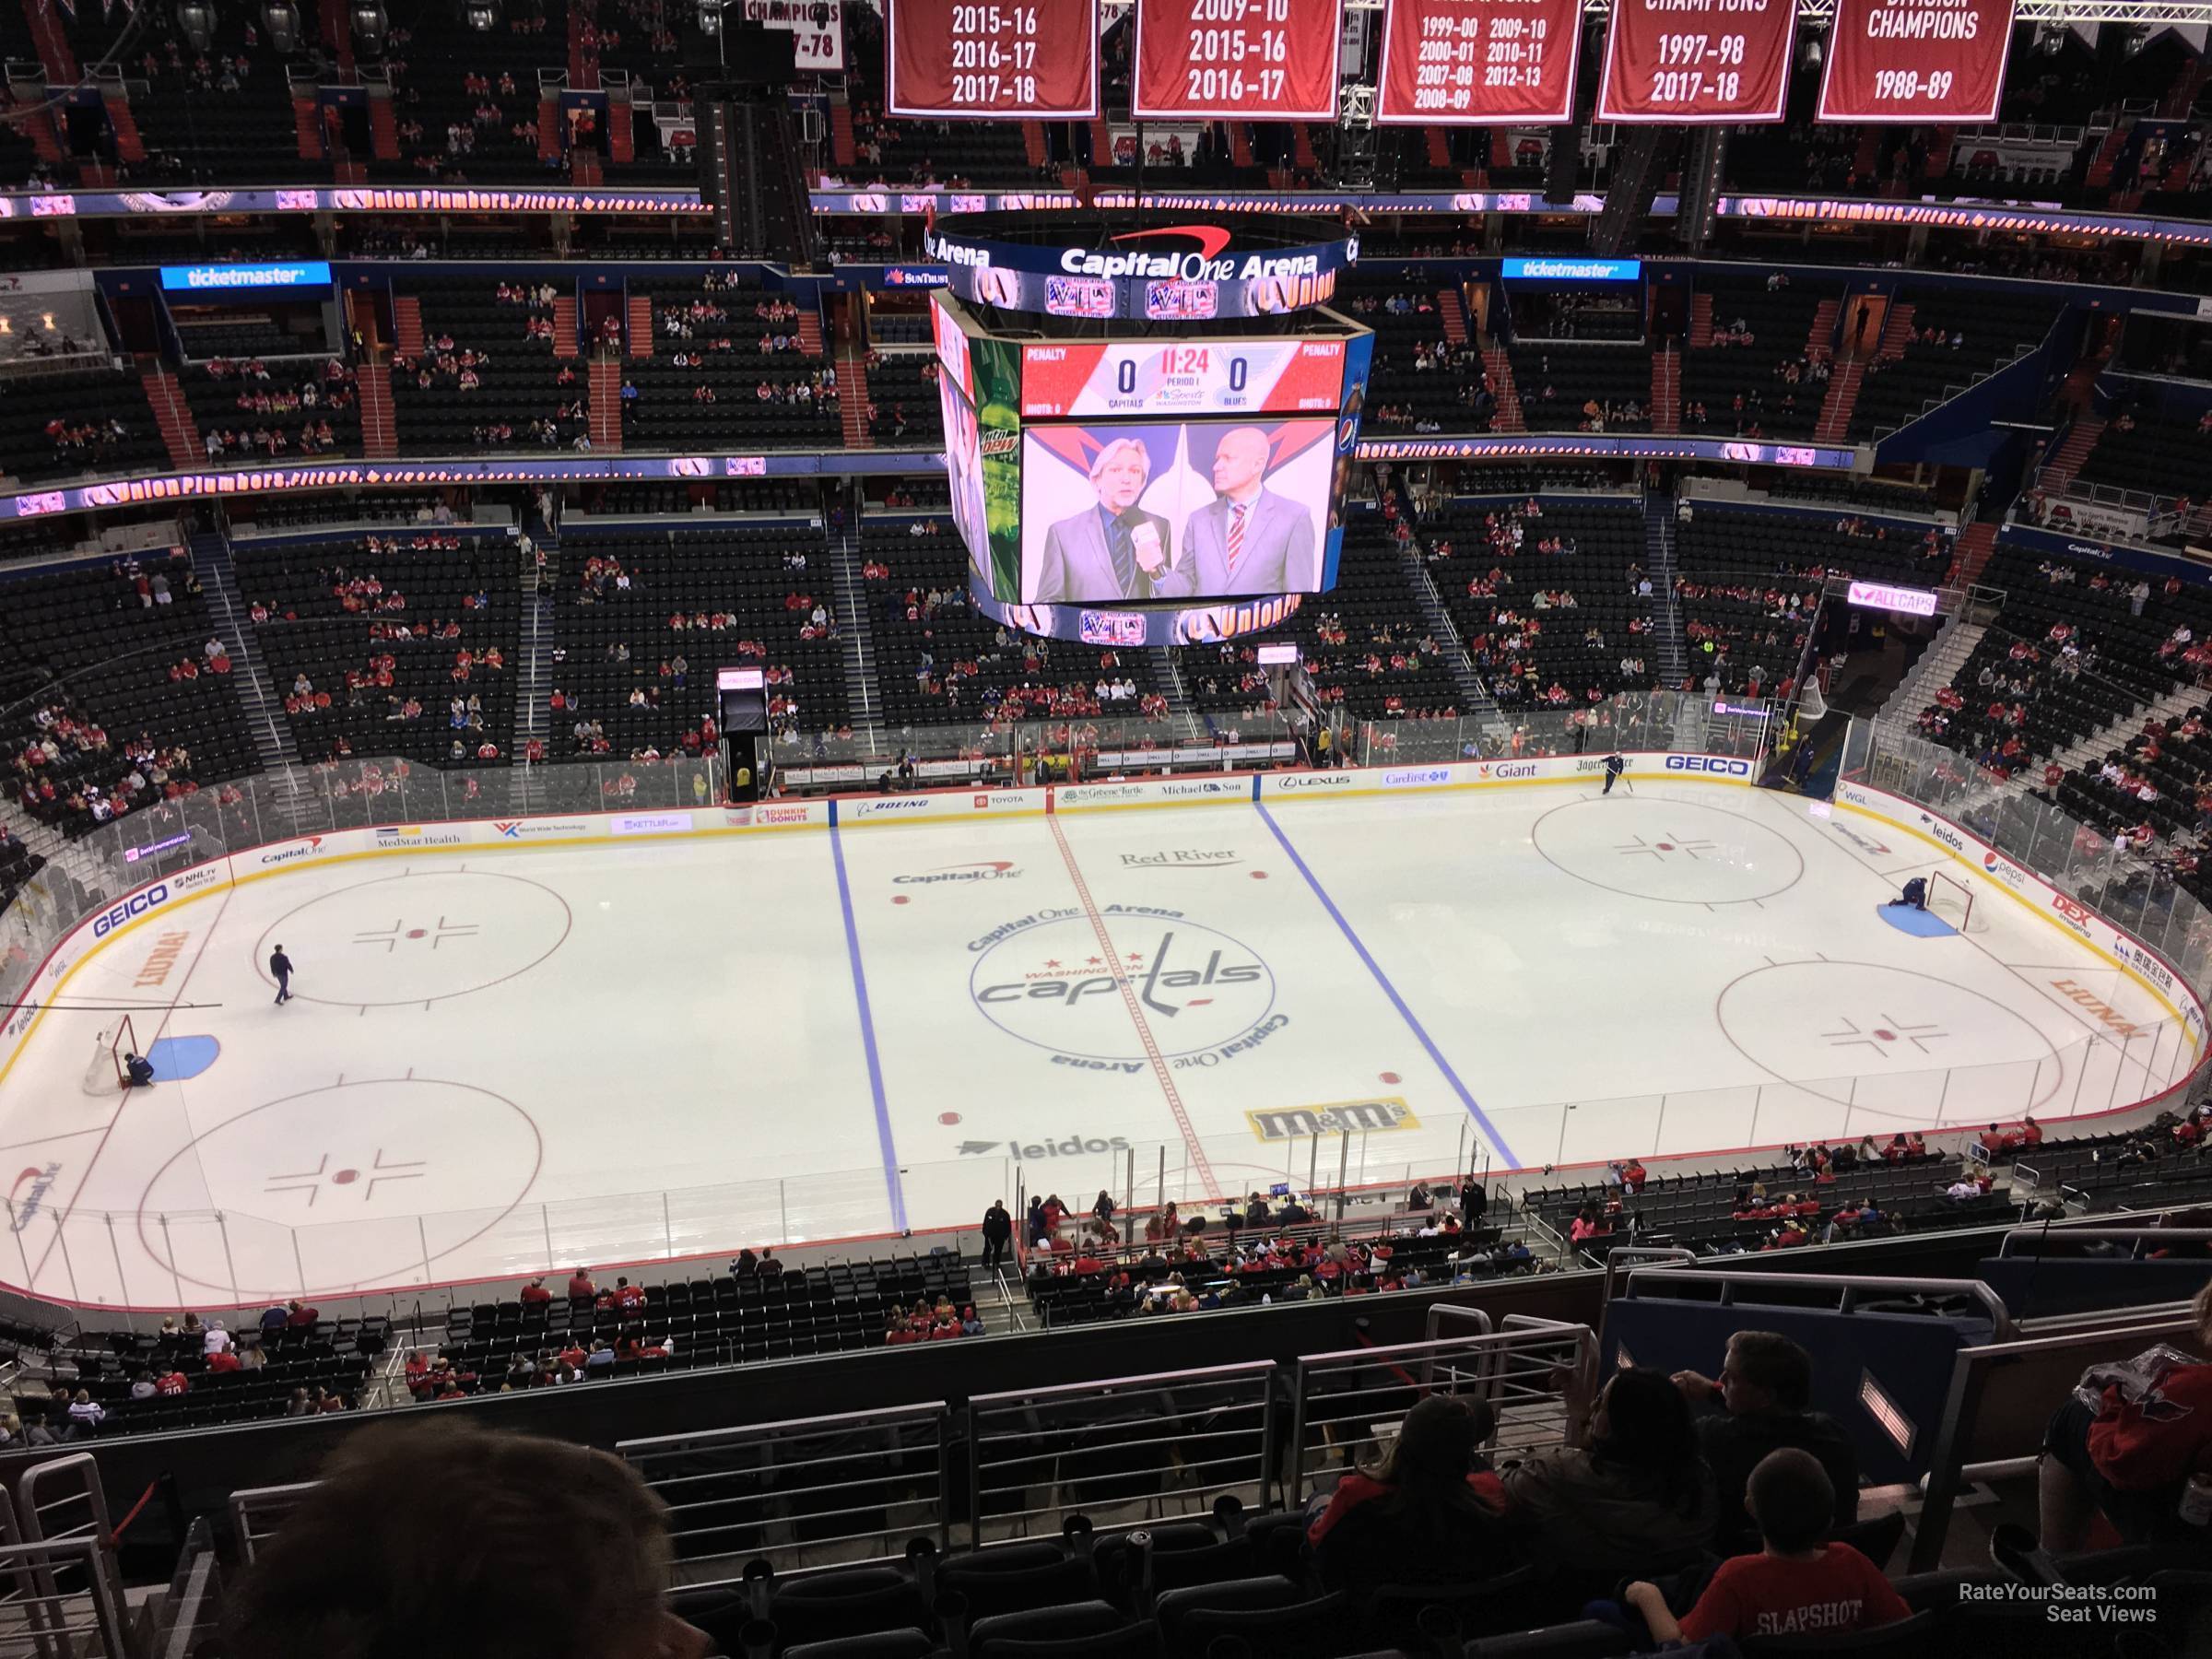 section 416, row m seat view  for hockey - capital one arena